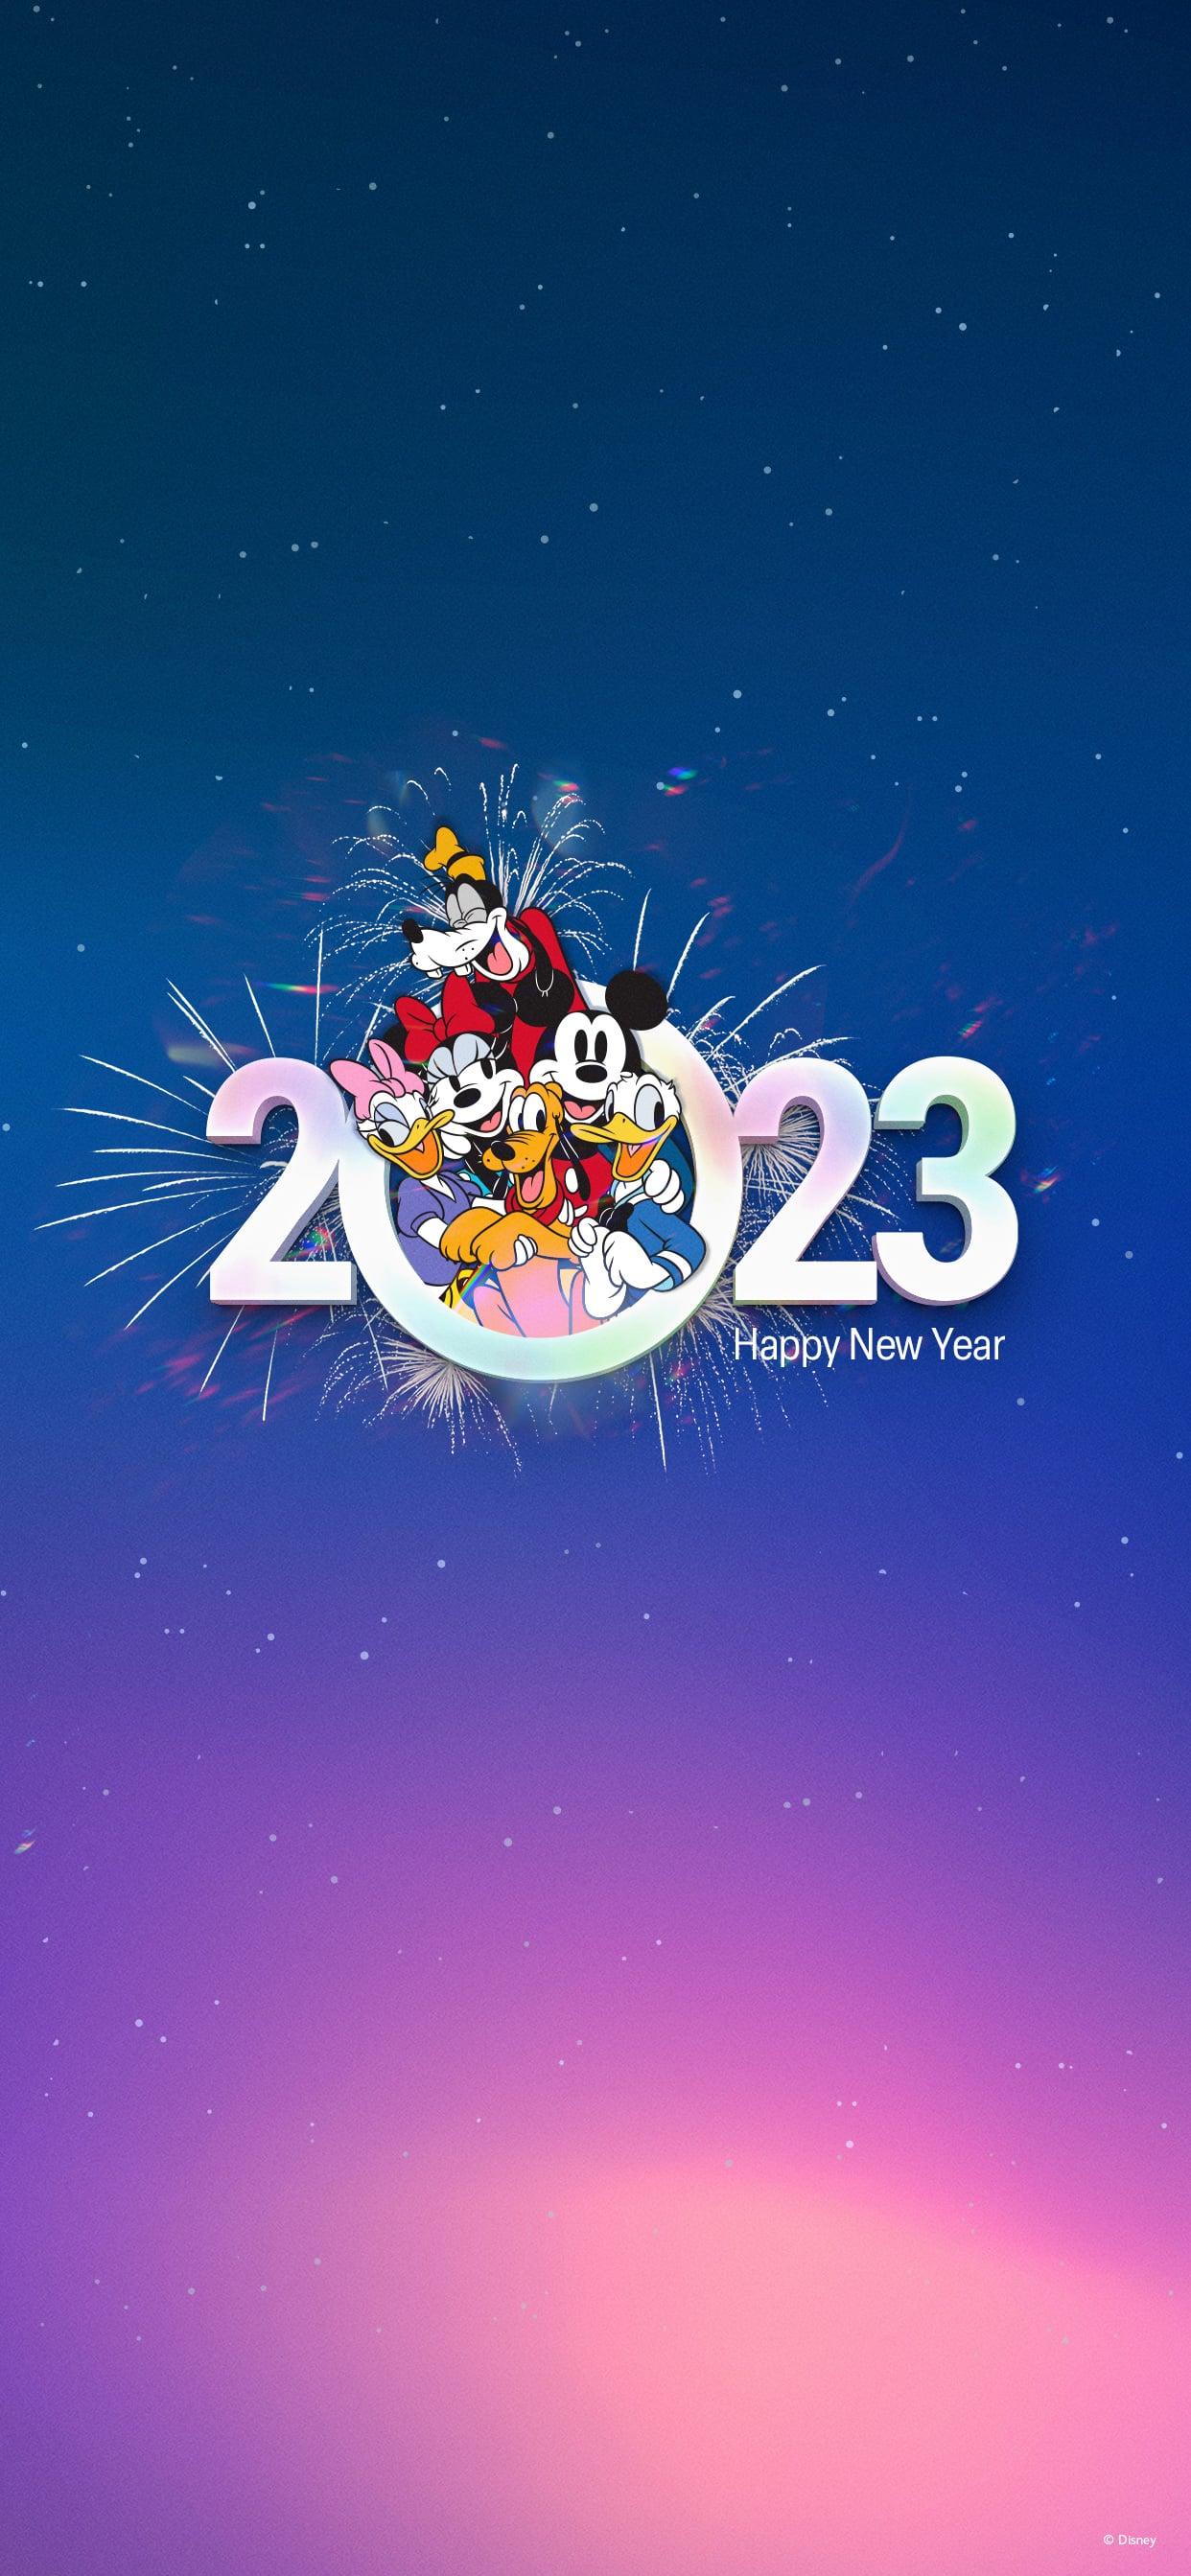 Happy New Year 2023 Wallpaper iPhoneAndroidApple Watch